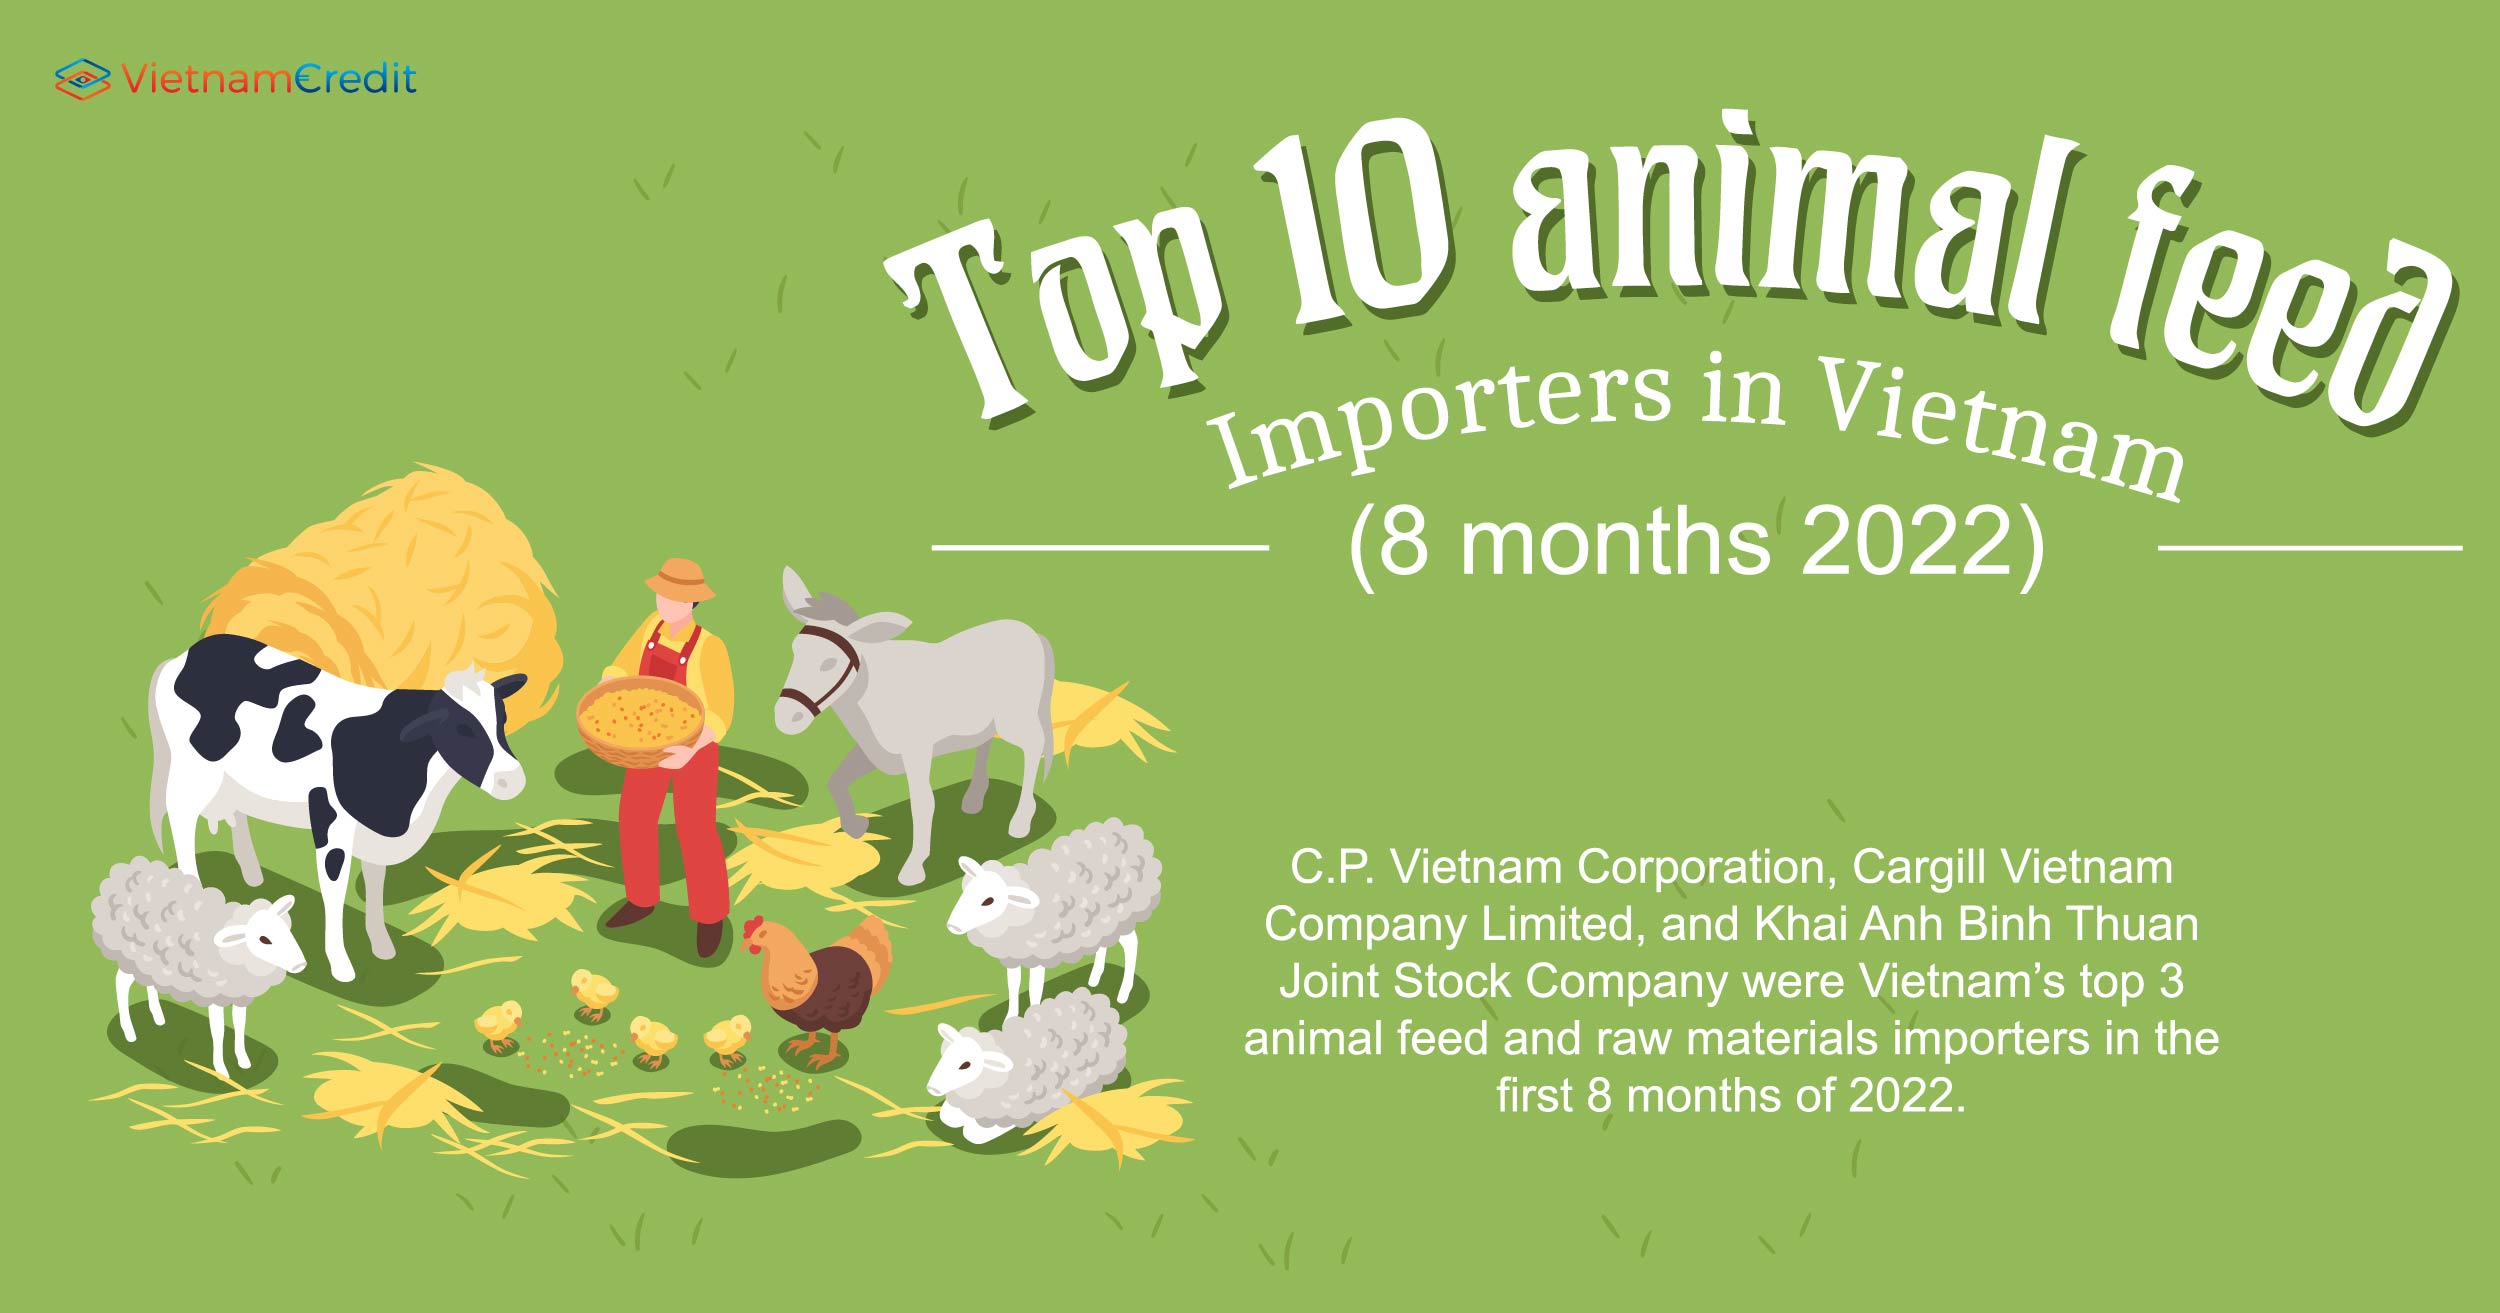 Top 10 animal feed importers in Vietnam (8 months 2022)